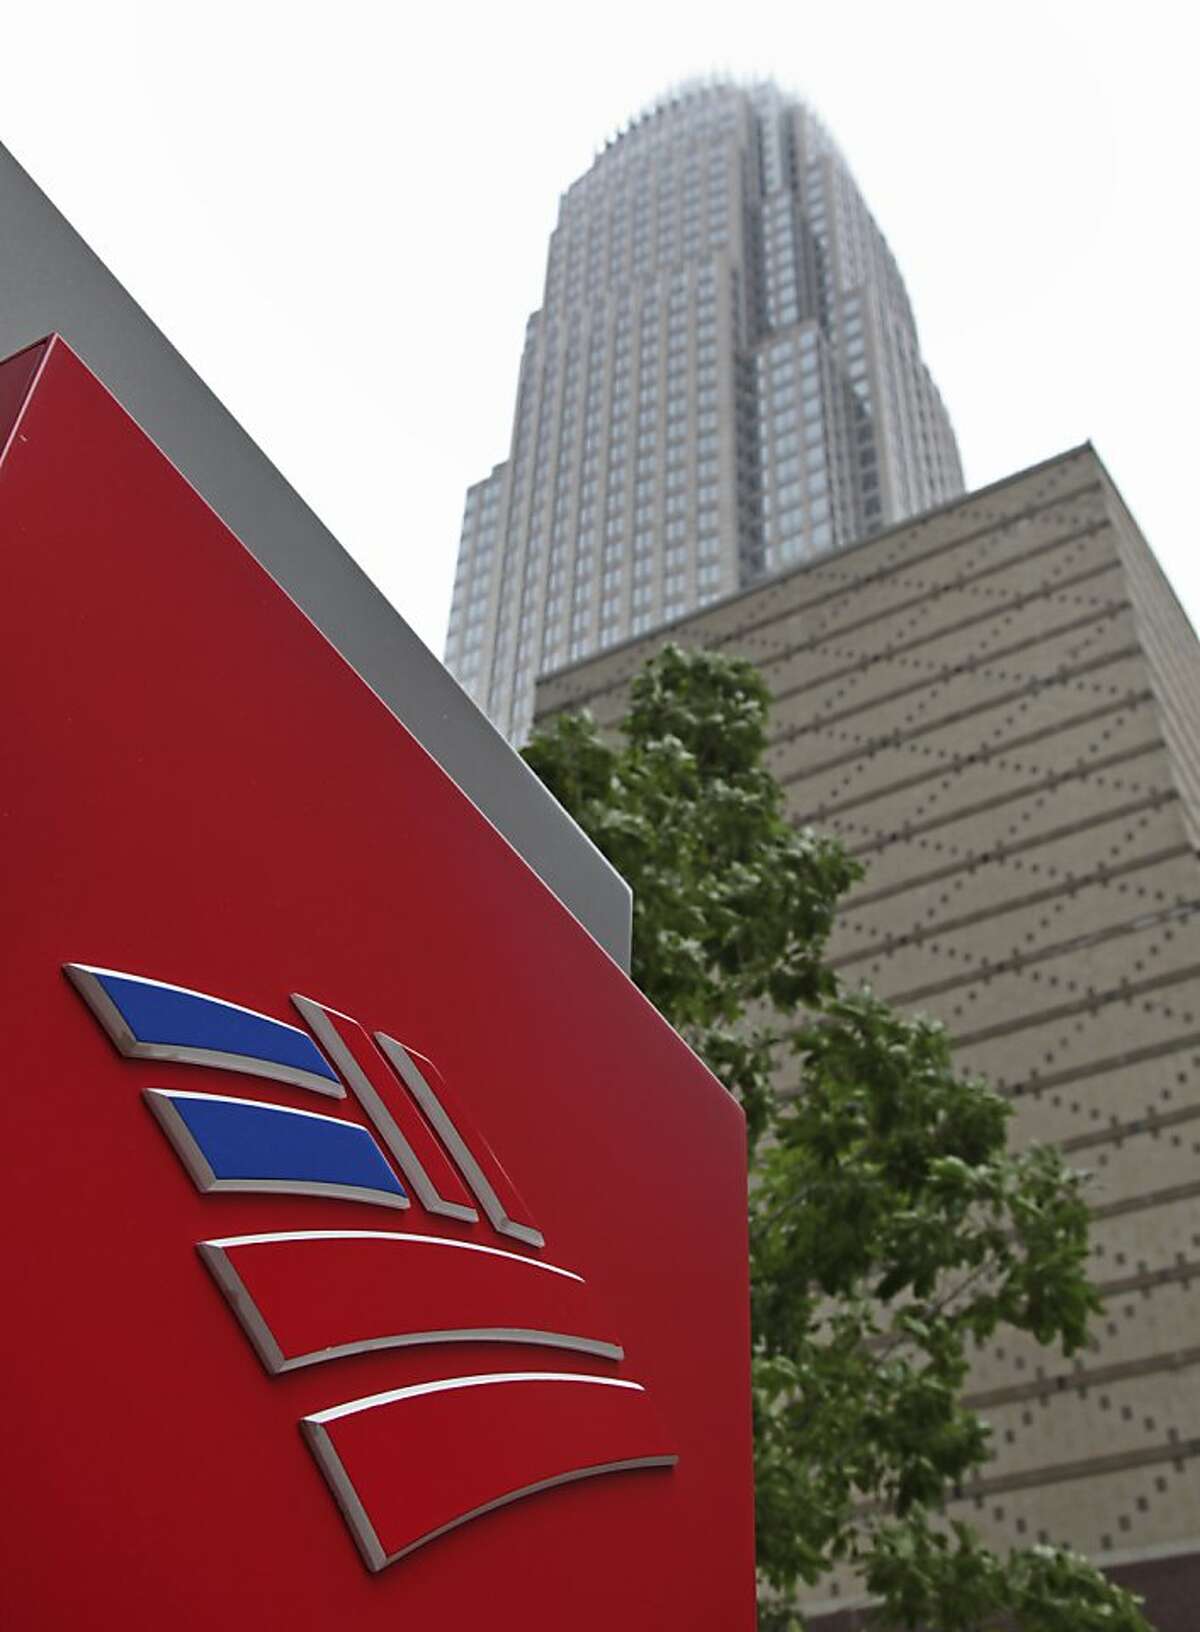 Bank of America's corporate headquarters is shown in Charlotte, N.C., Thursday, April 19, 2012. Bank of America said Thursday that it set aside less money to cover bad loans in the first three months of the year than it has since before the 2008 financial crisis. The bank said it earned $653 million in the first quarter, or 3 cents per share. (AP Photo/Chuck Burton)